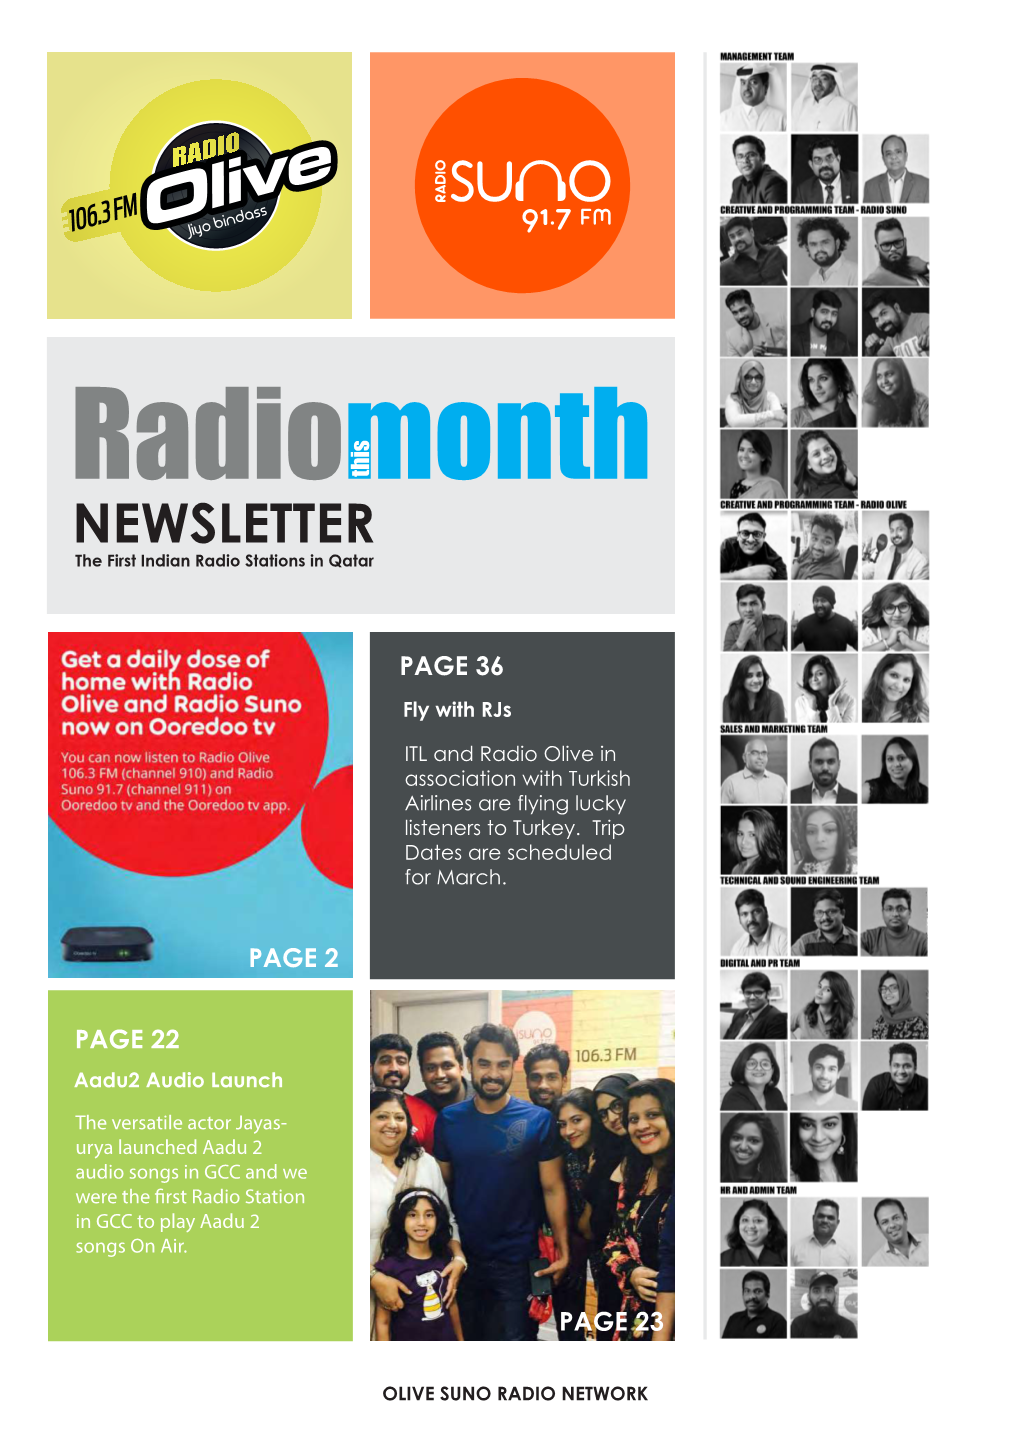 Radiomonththis NEWSLETTER the First Indian Radio Stations in Qatar